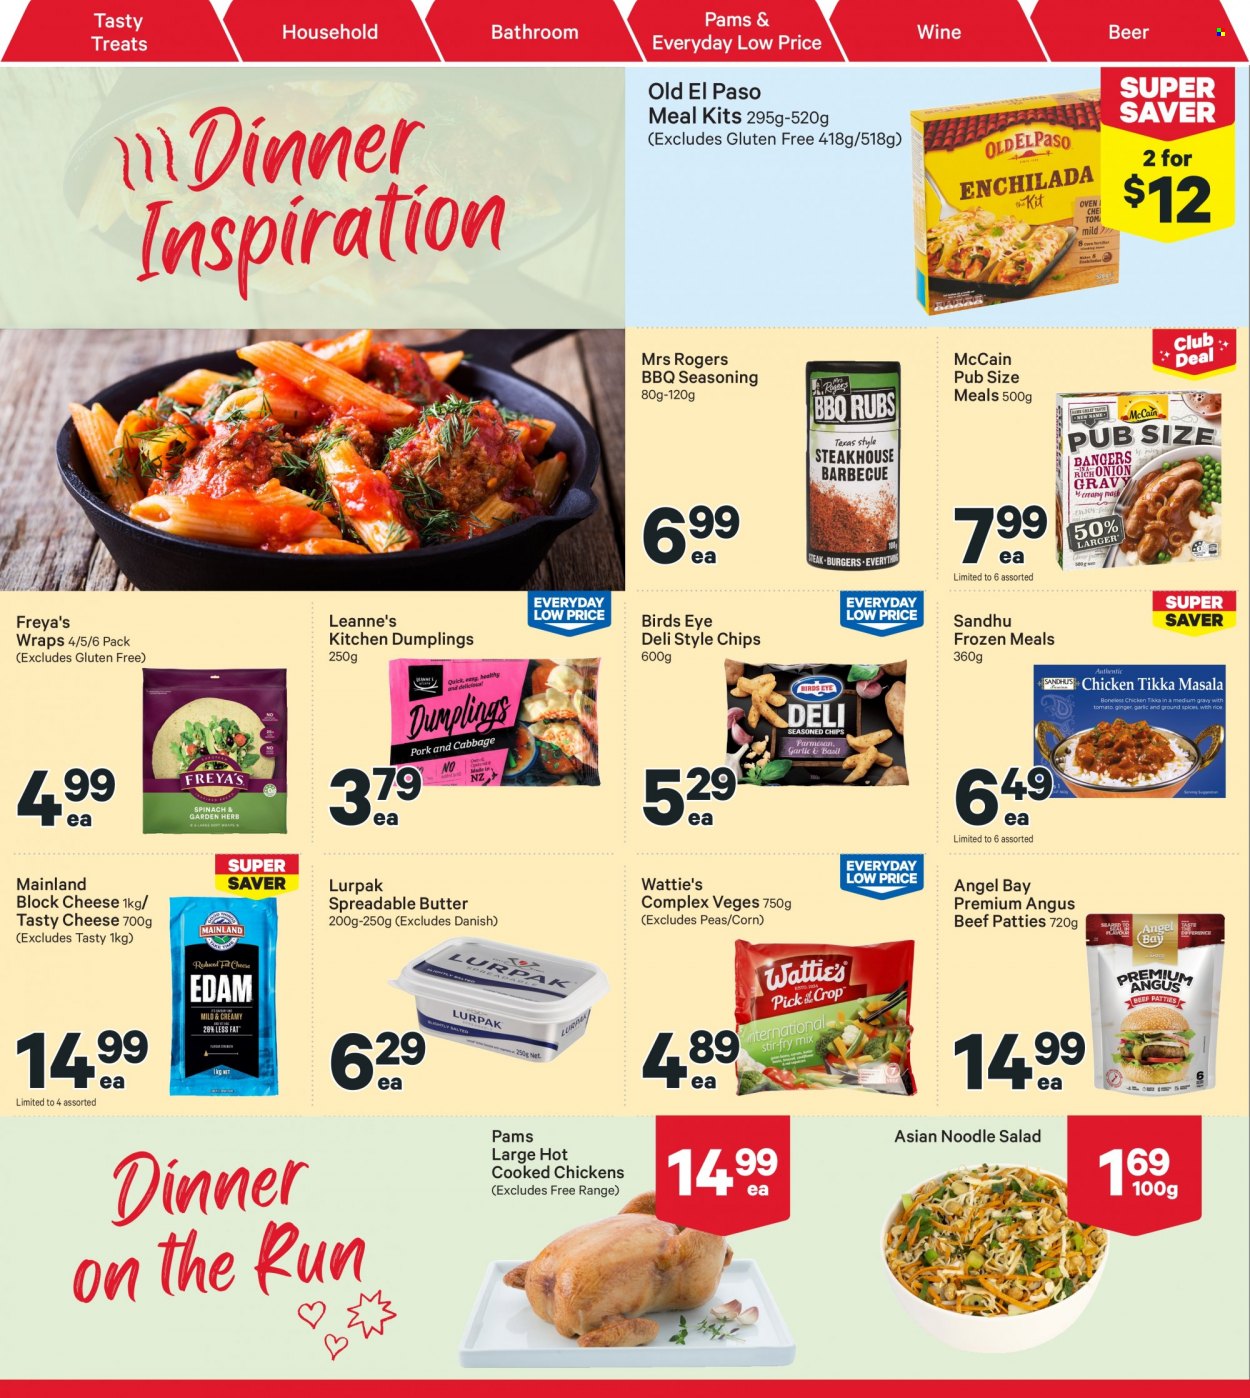 thumbnail - New World mailer - 28.11.2022 - 04.12.2022 - Sales products - Old El Paso, wraps, corn, peas, salad, dumplings, Bird's Eye, noodles, Wattie's, cheese, butter, spreadable butter, McCain, spice, wine, beer, beef meat. Page 16.